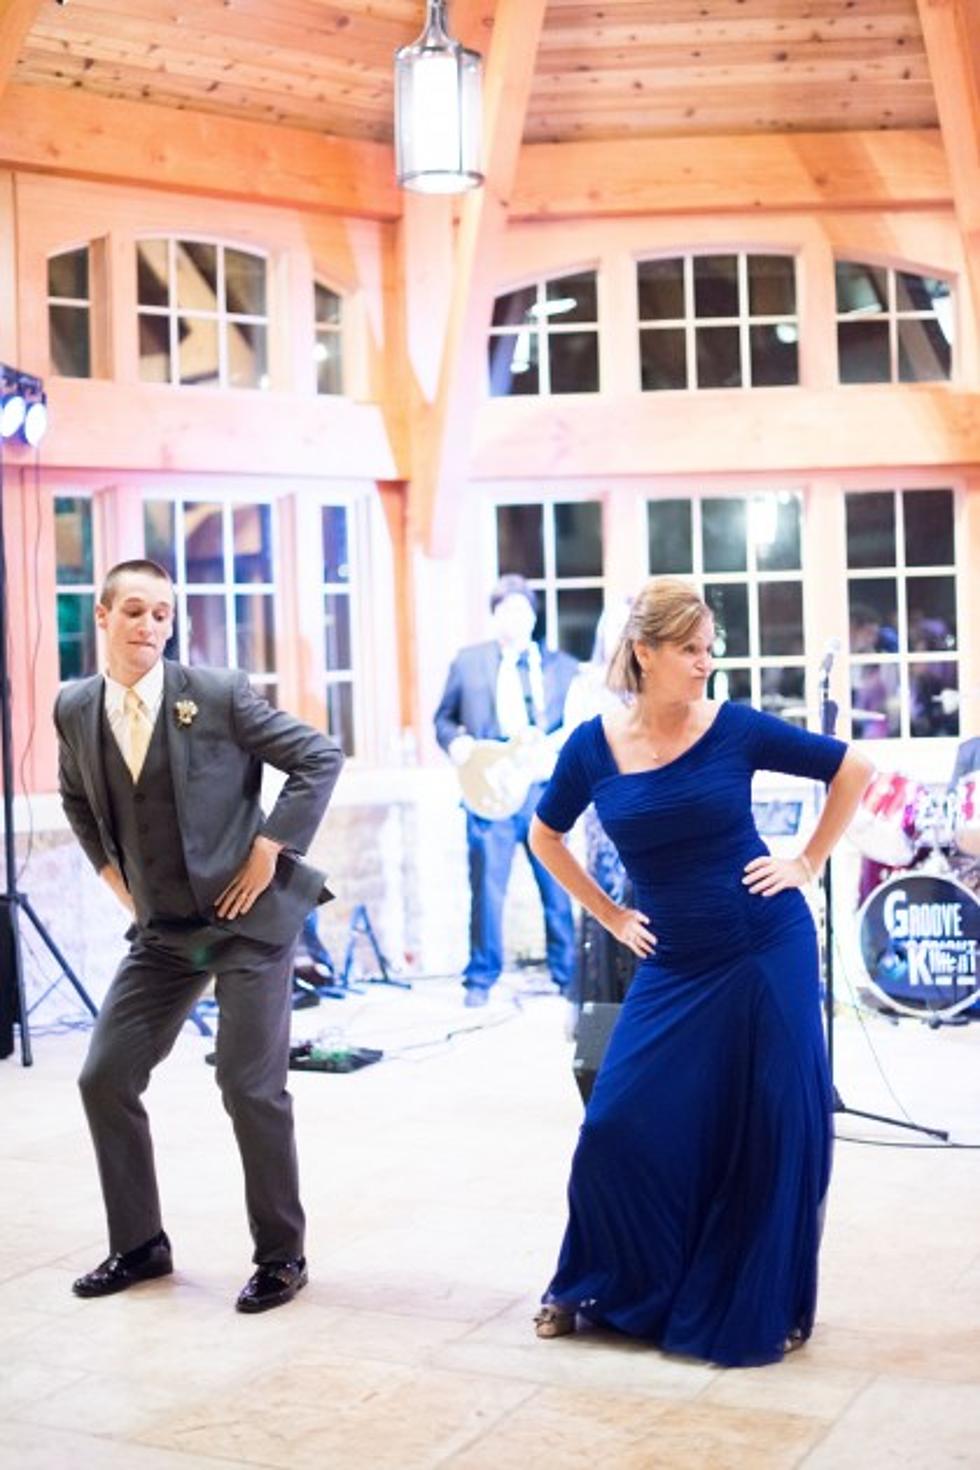 A Wedding Reception Mother-Son Dance to End All Dances [Video]